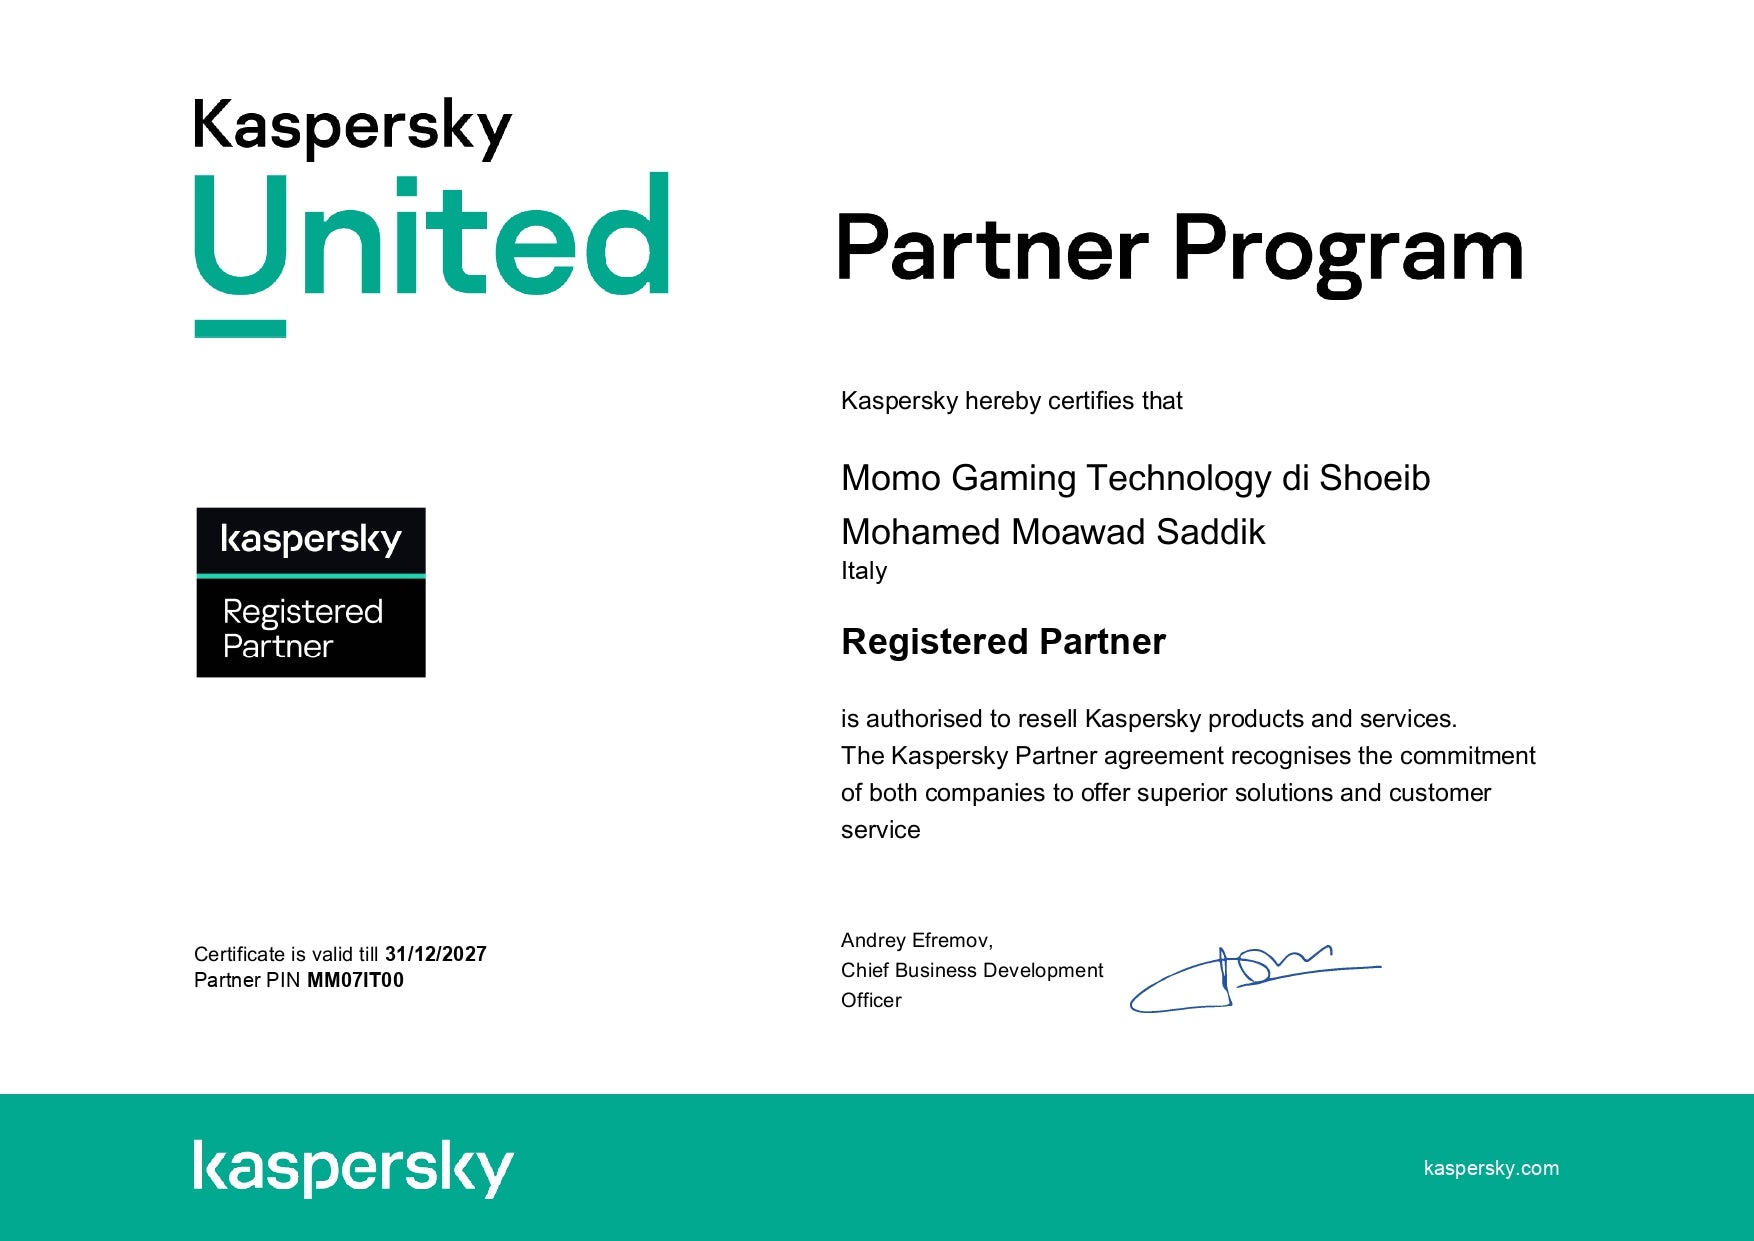 KASPERSKY INTERNET SECURITY 2024 1PC 1 ANNO ESD